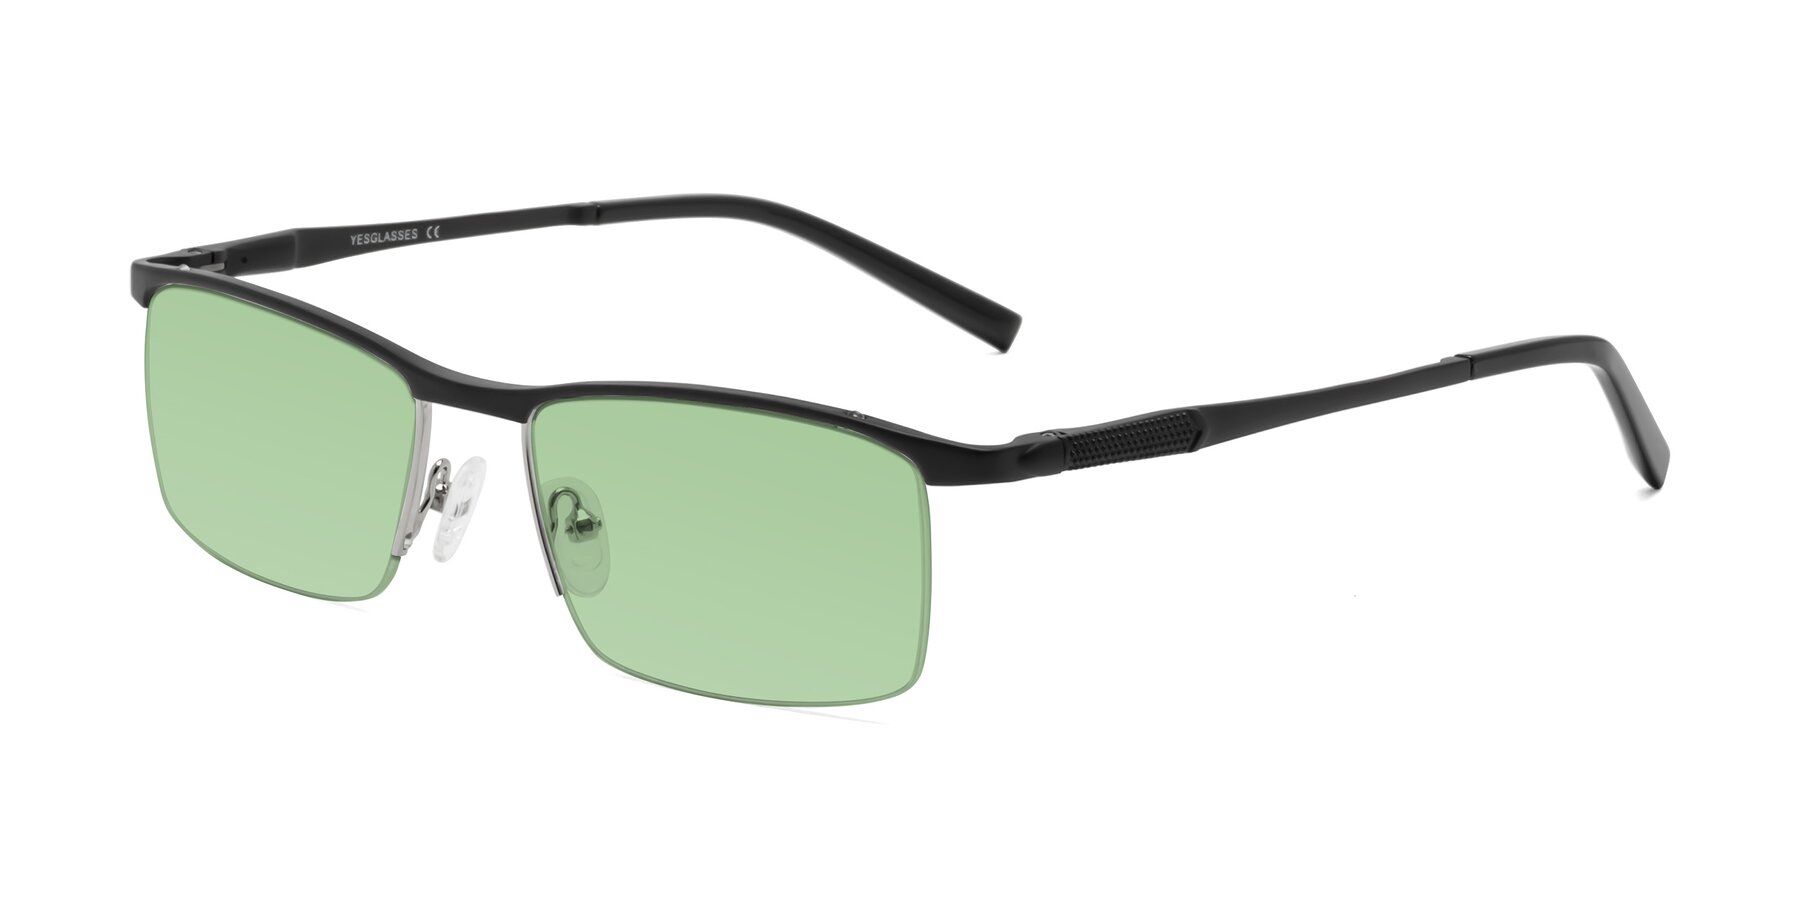 Angle of CX6303 in Black with Medium Green Tinted Lenses